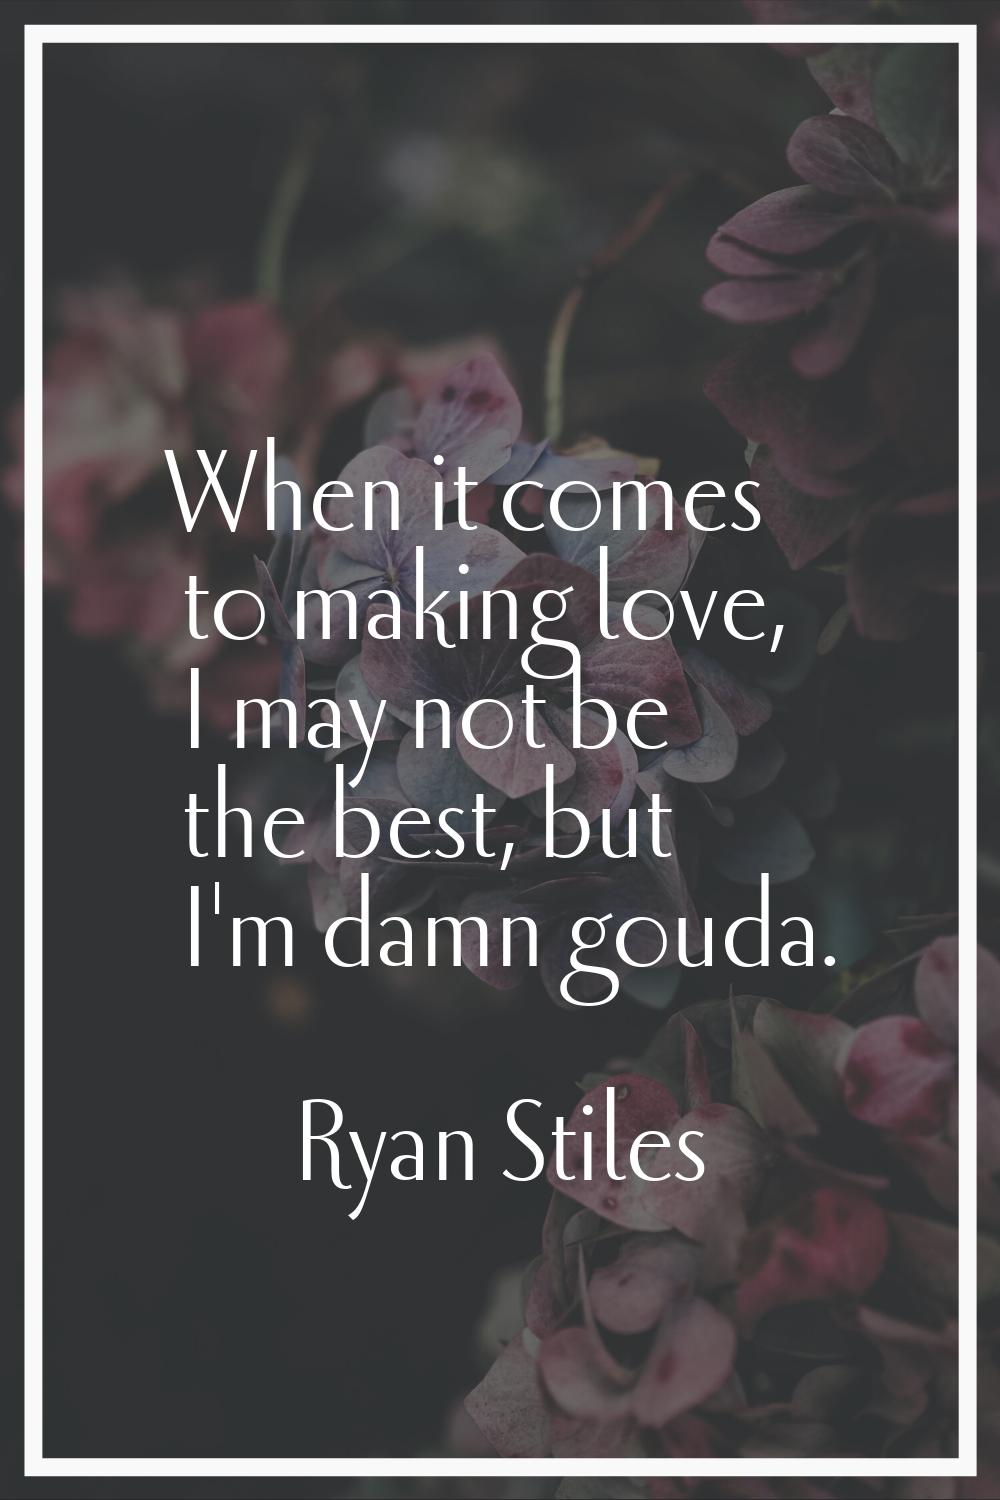 When it comes to making love, I may not be the best, but I'm damn gouda.